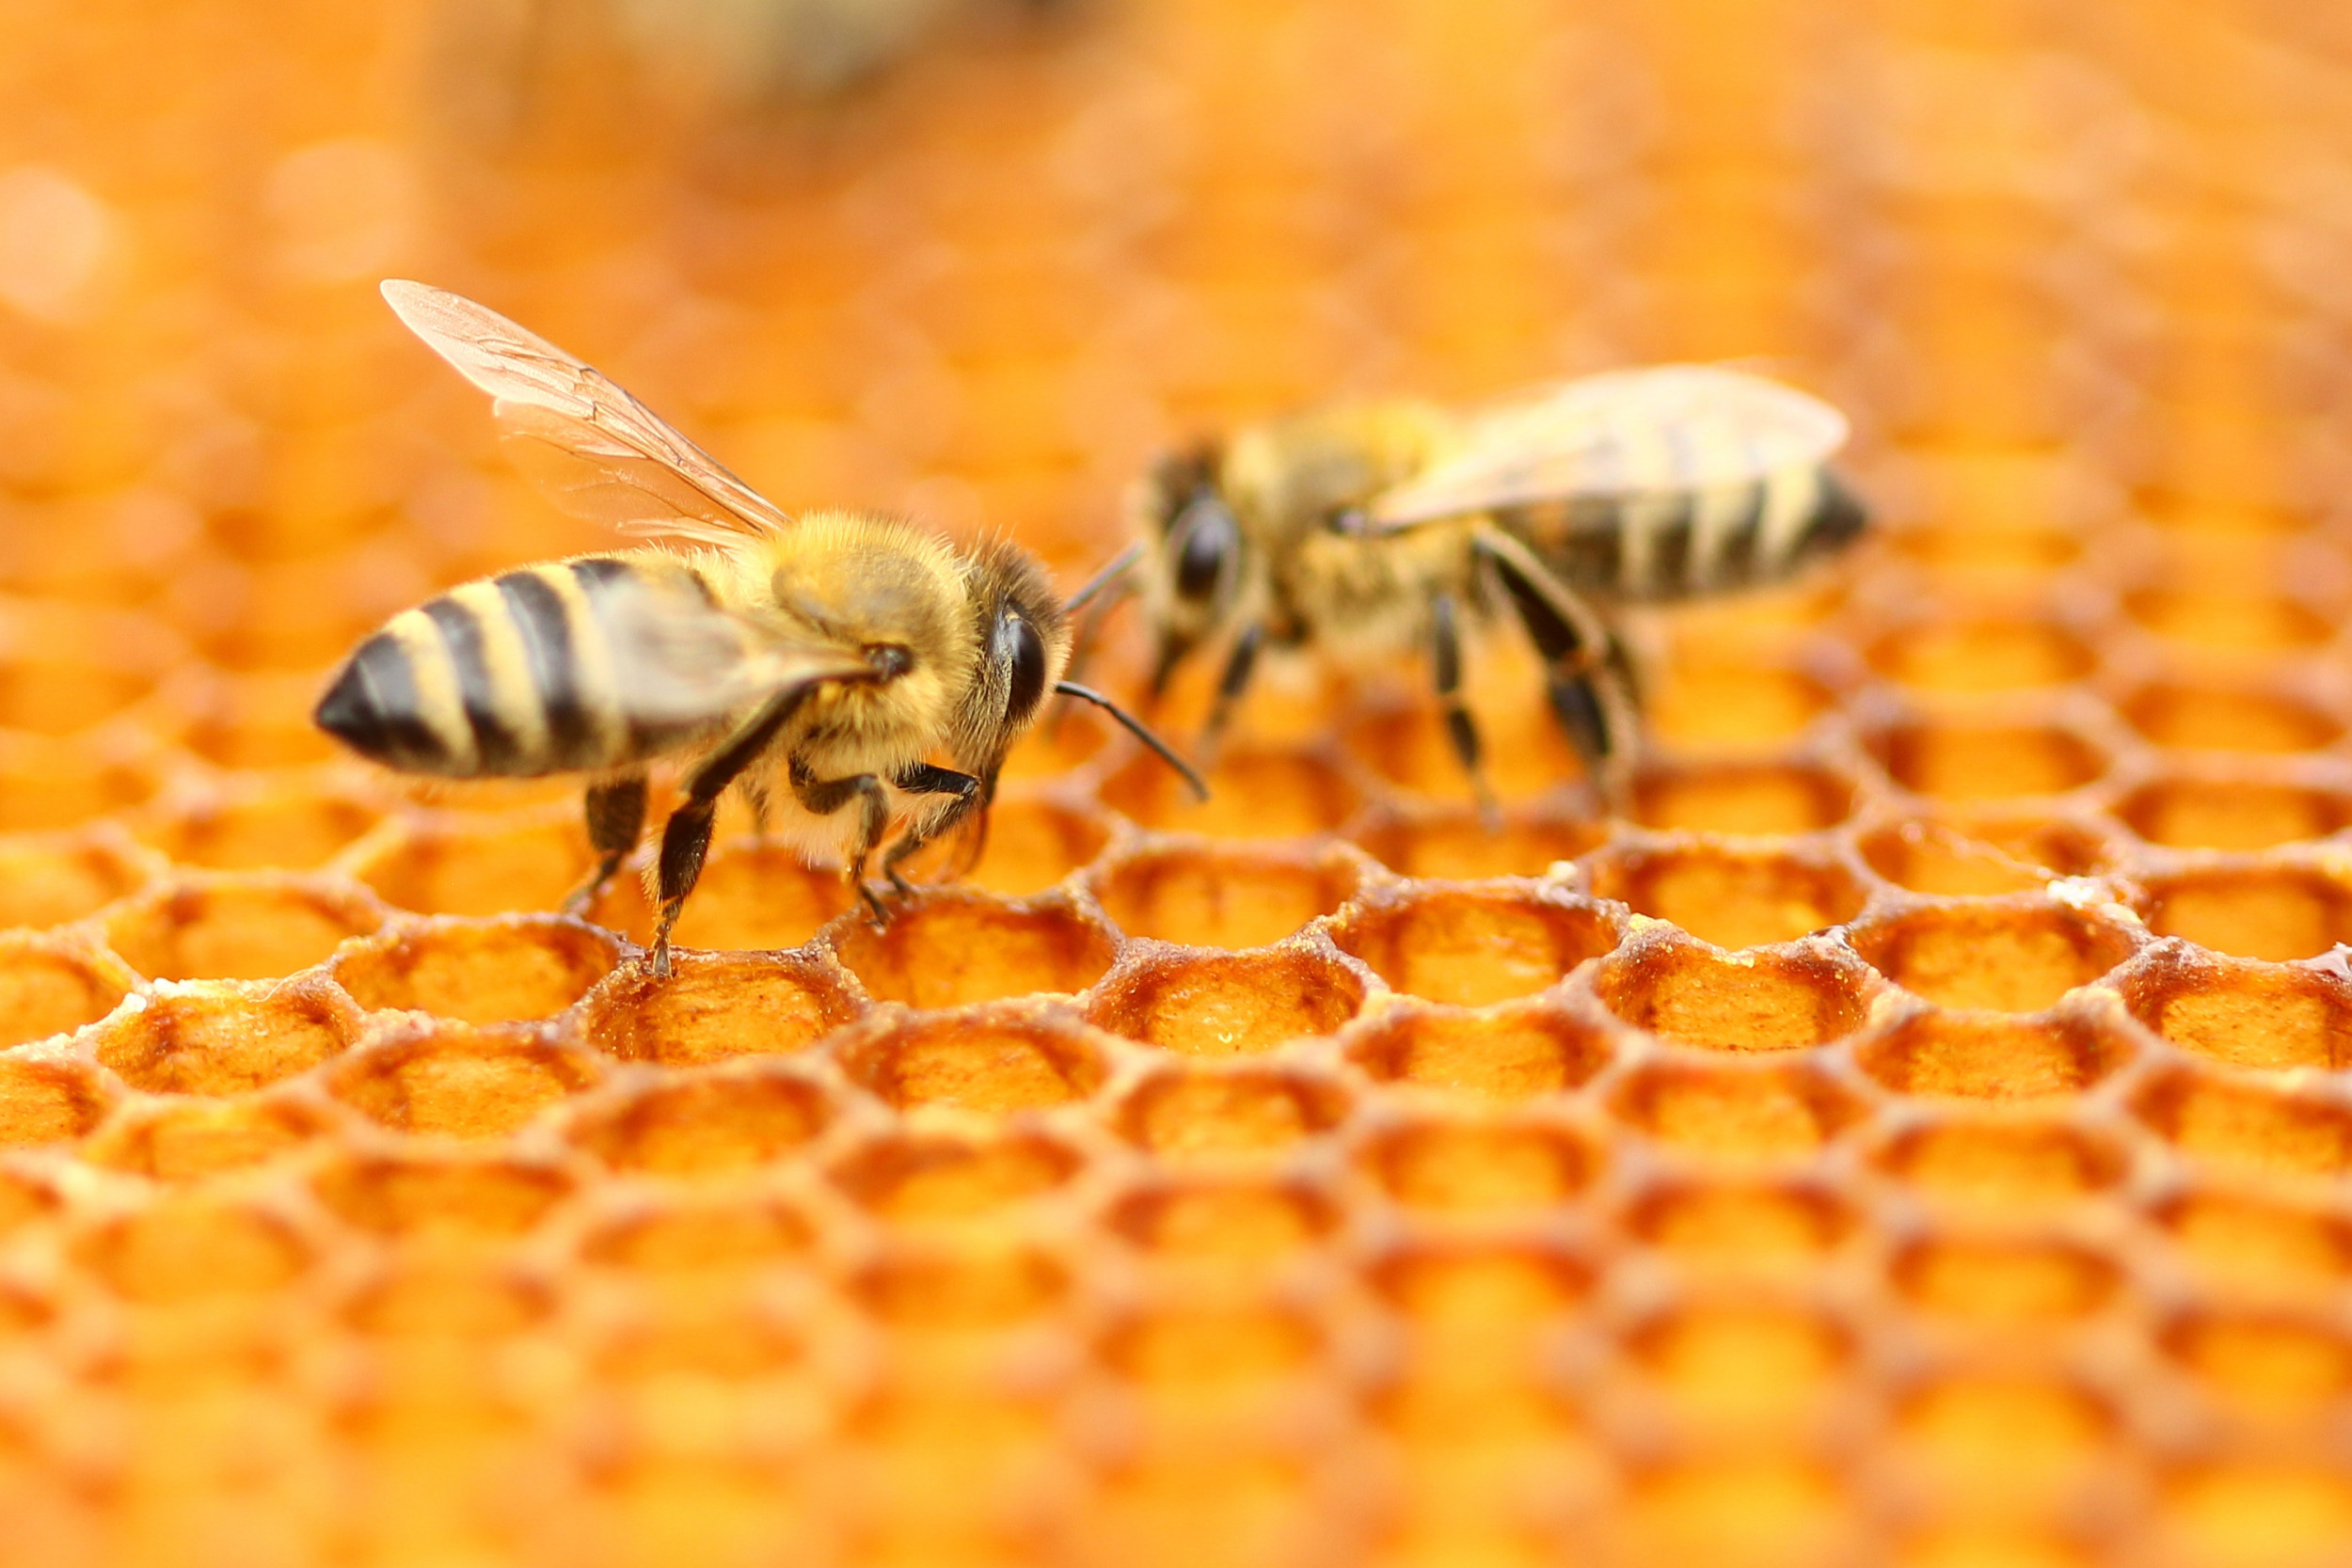 Male Honey Bees Temporarily Blind Queens With Their Semen So They Cant